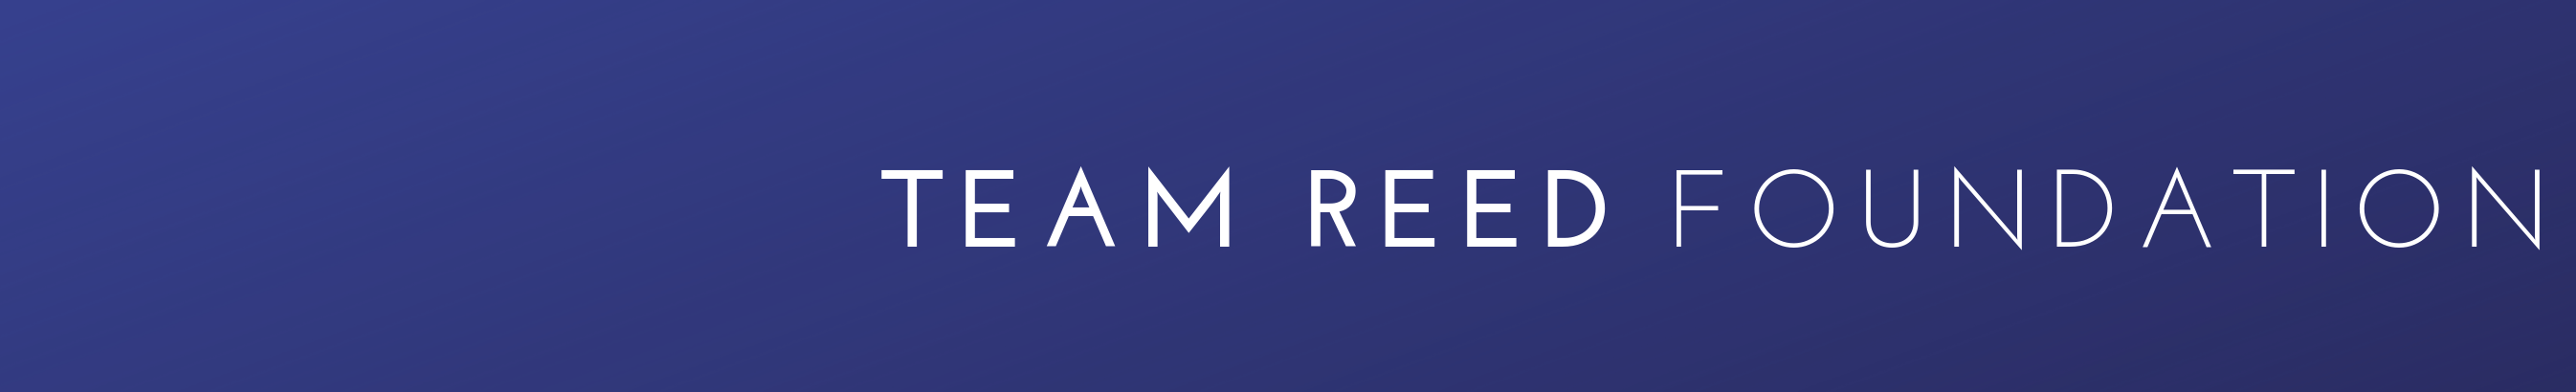 Team Reed Foundation's profile banner